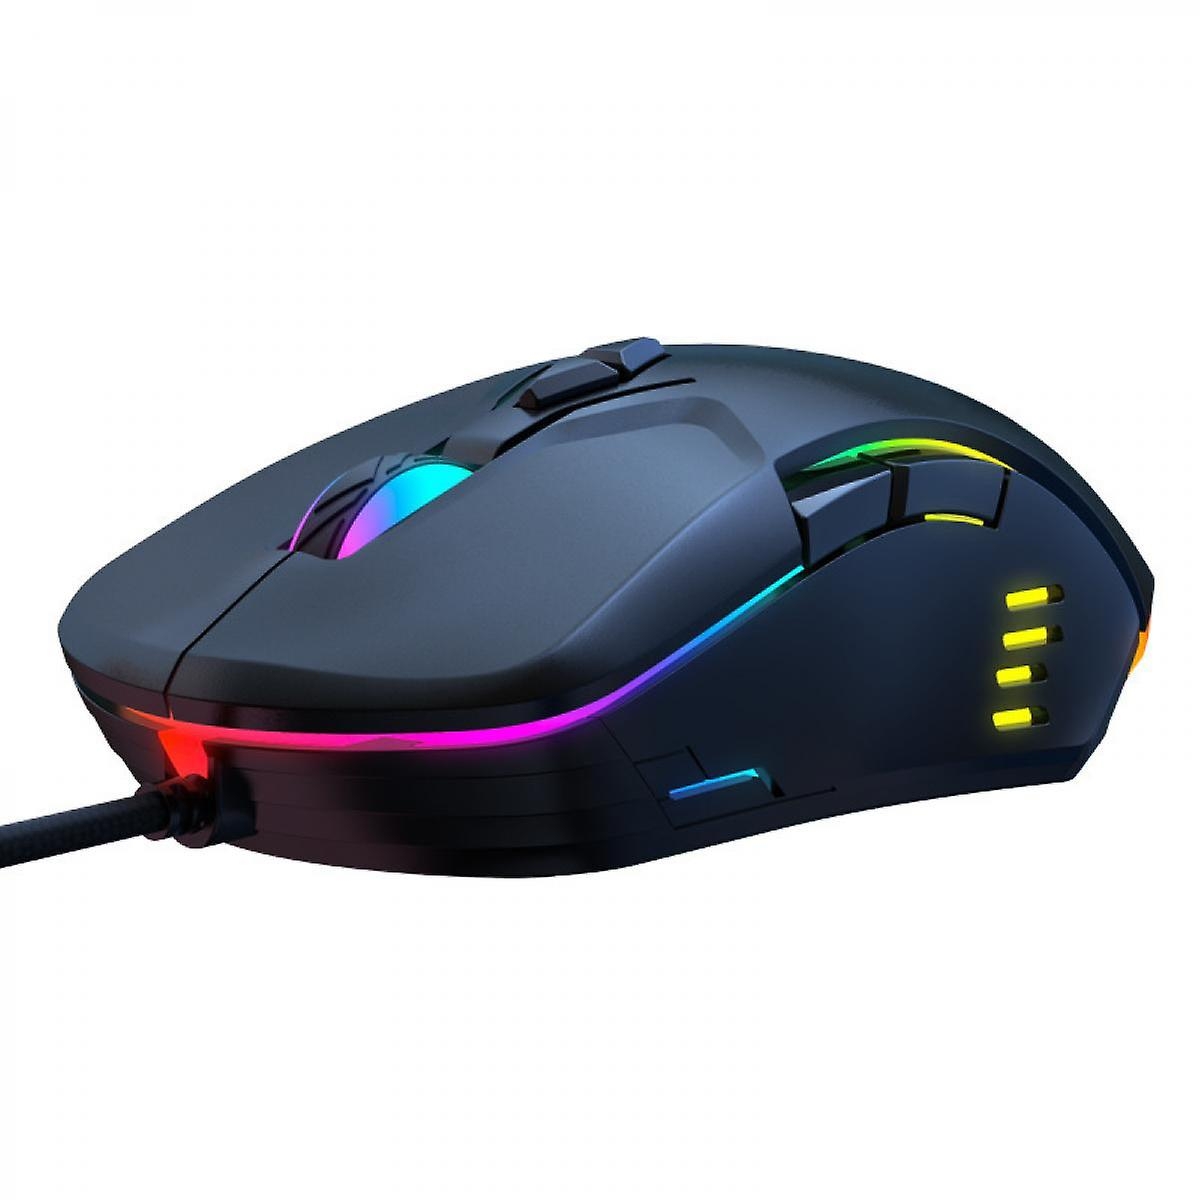 How To Change Color On The Pictek Gaming Mouse Wired